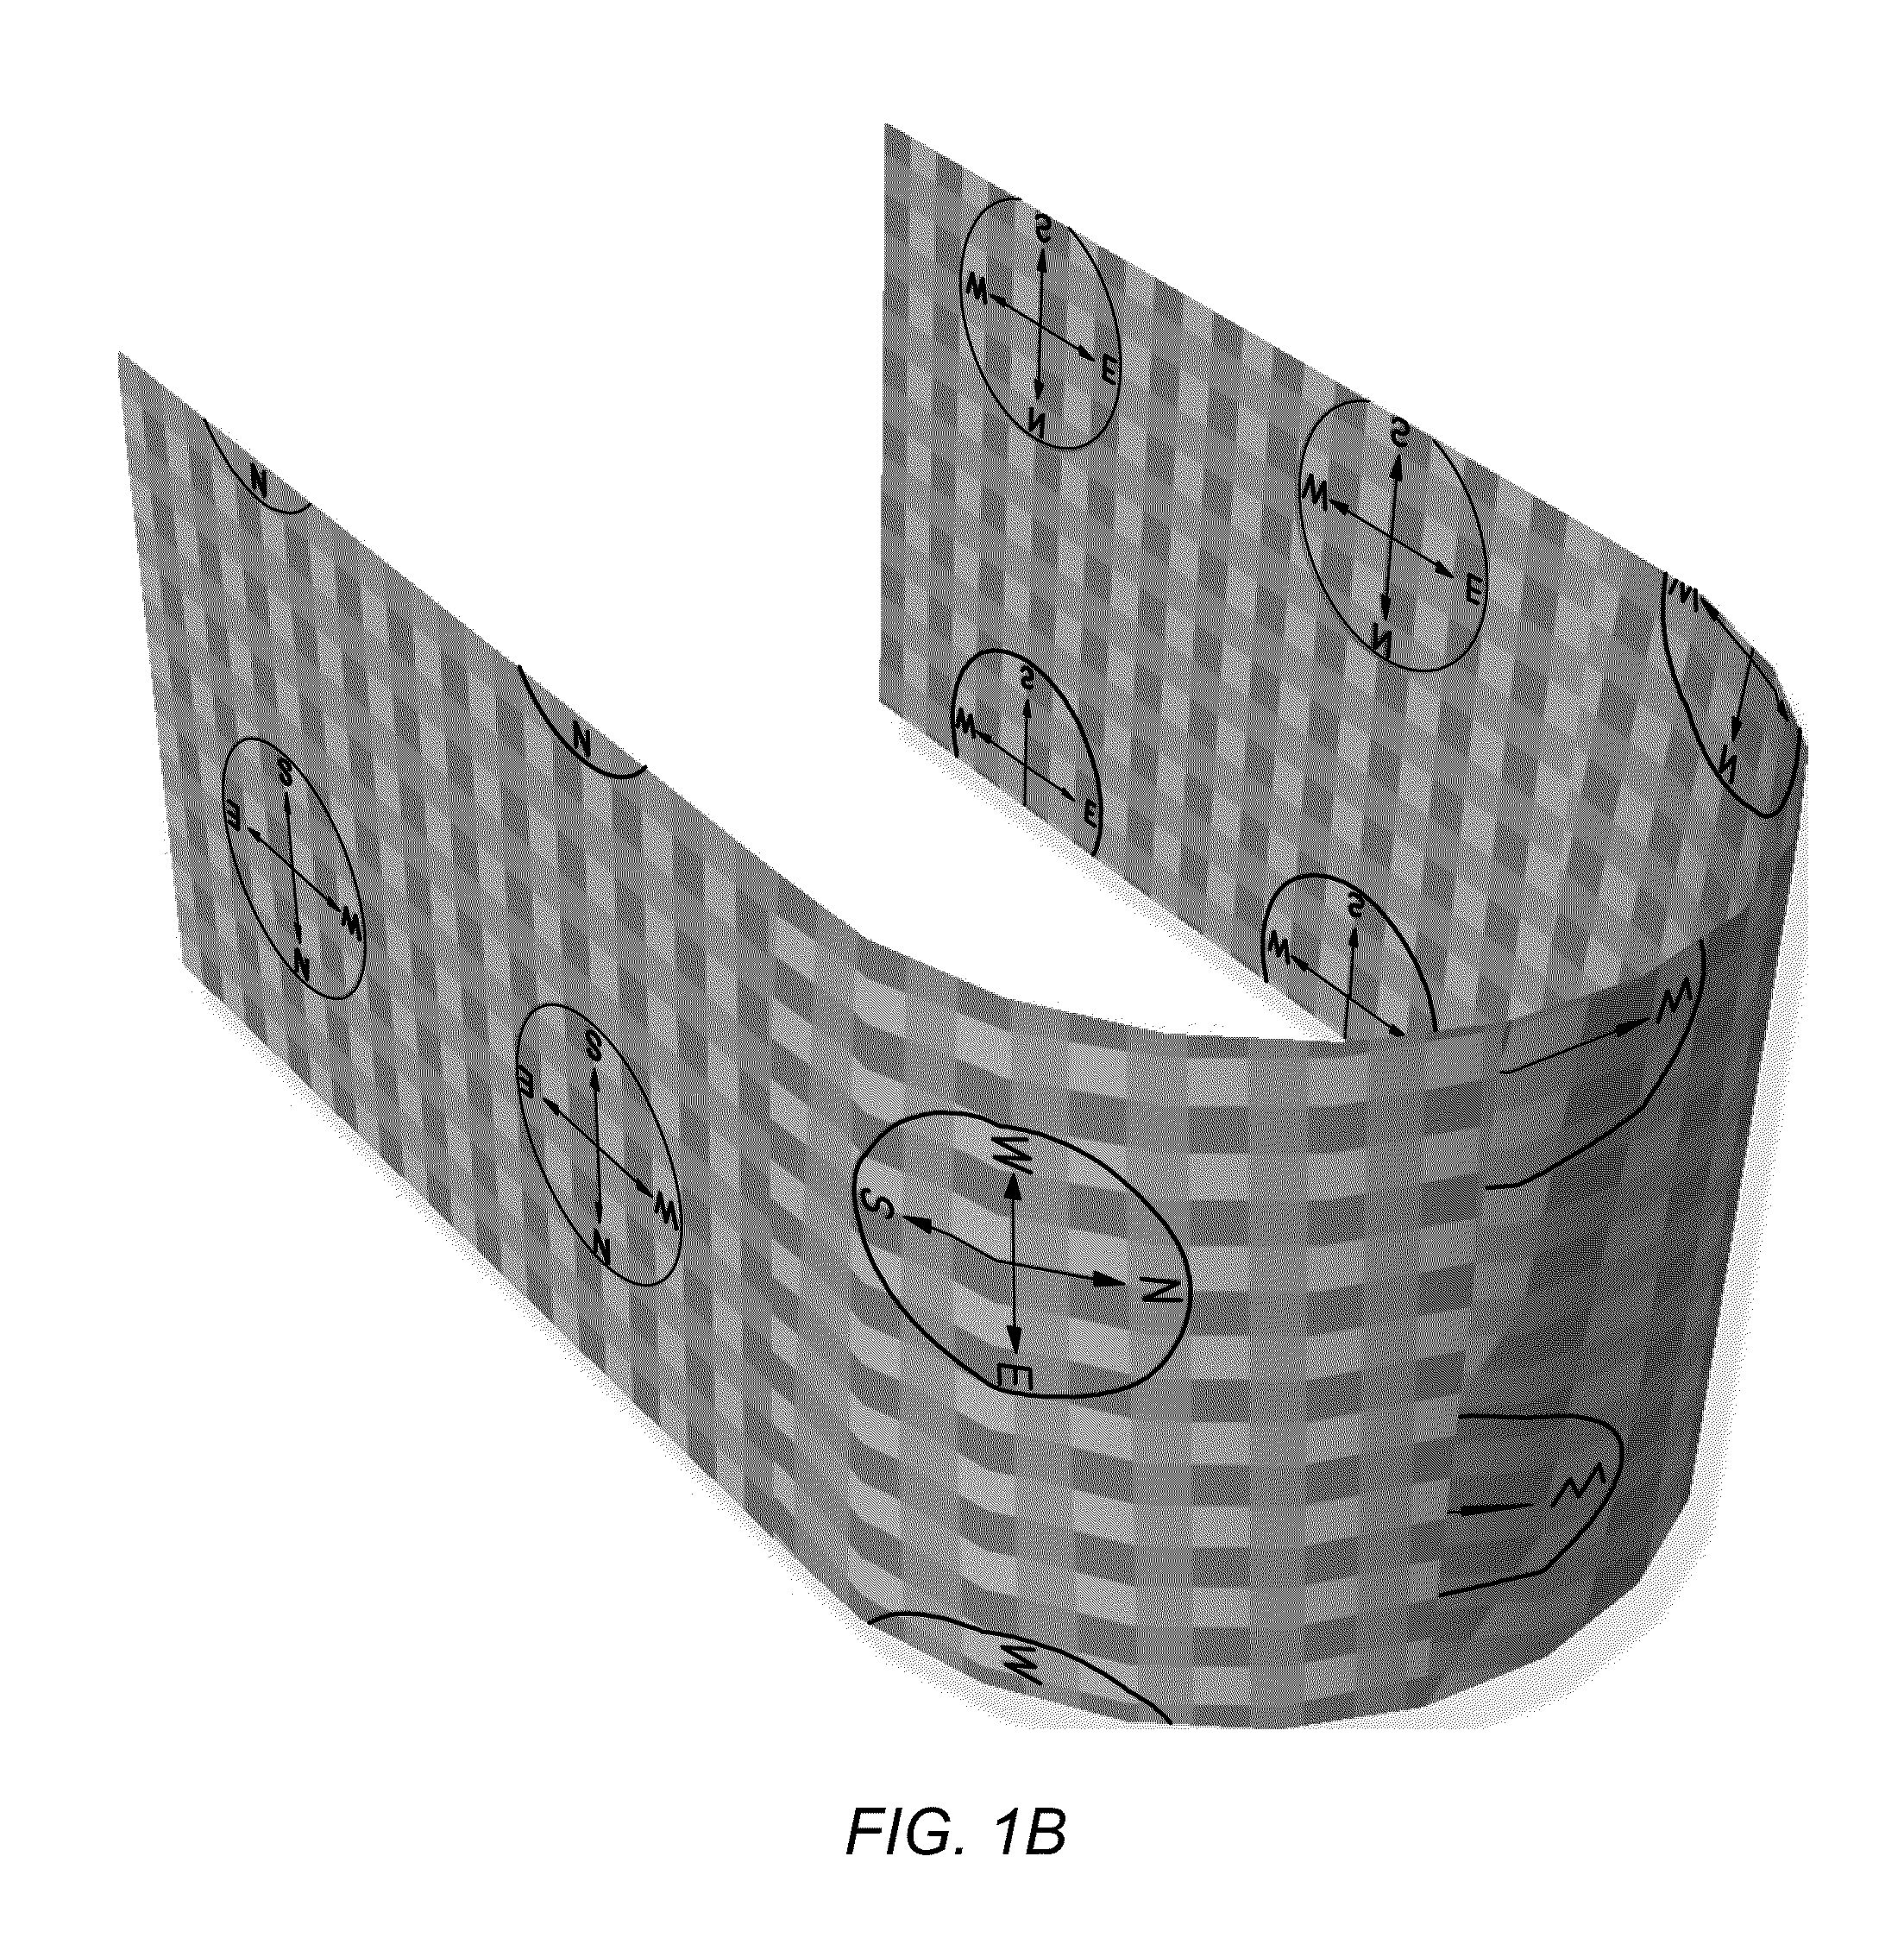 System and Method for Generating 2D Texture Coordinates for 3D Meshed Surfaces